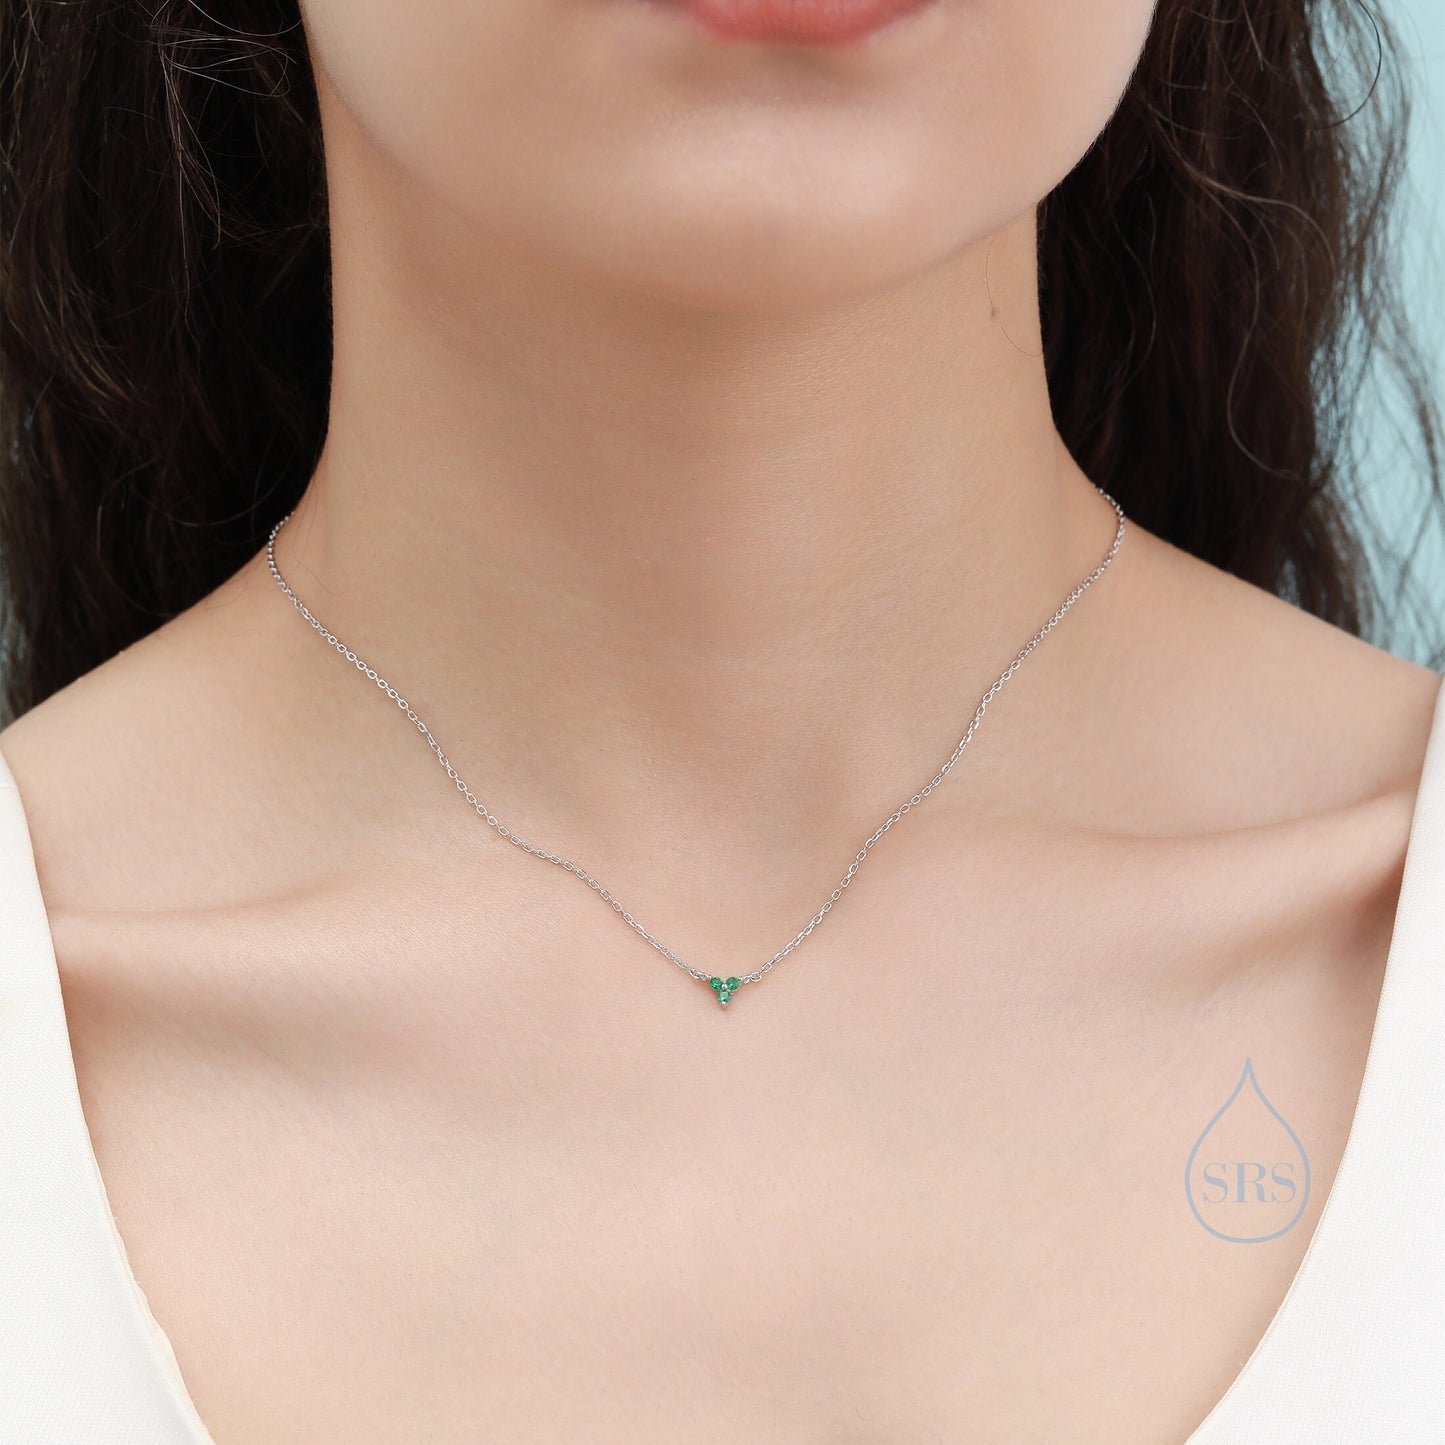 Extra Tiny Emerald Green CZ Trio Pendant Necklace in Sterling Silver, Available in Clear CZ or Green CZ, Silver or Gold,